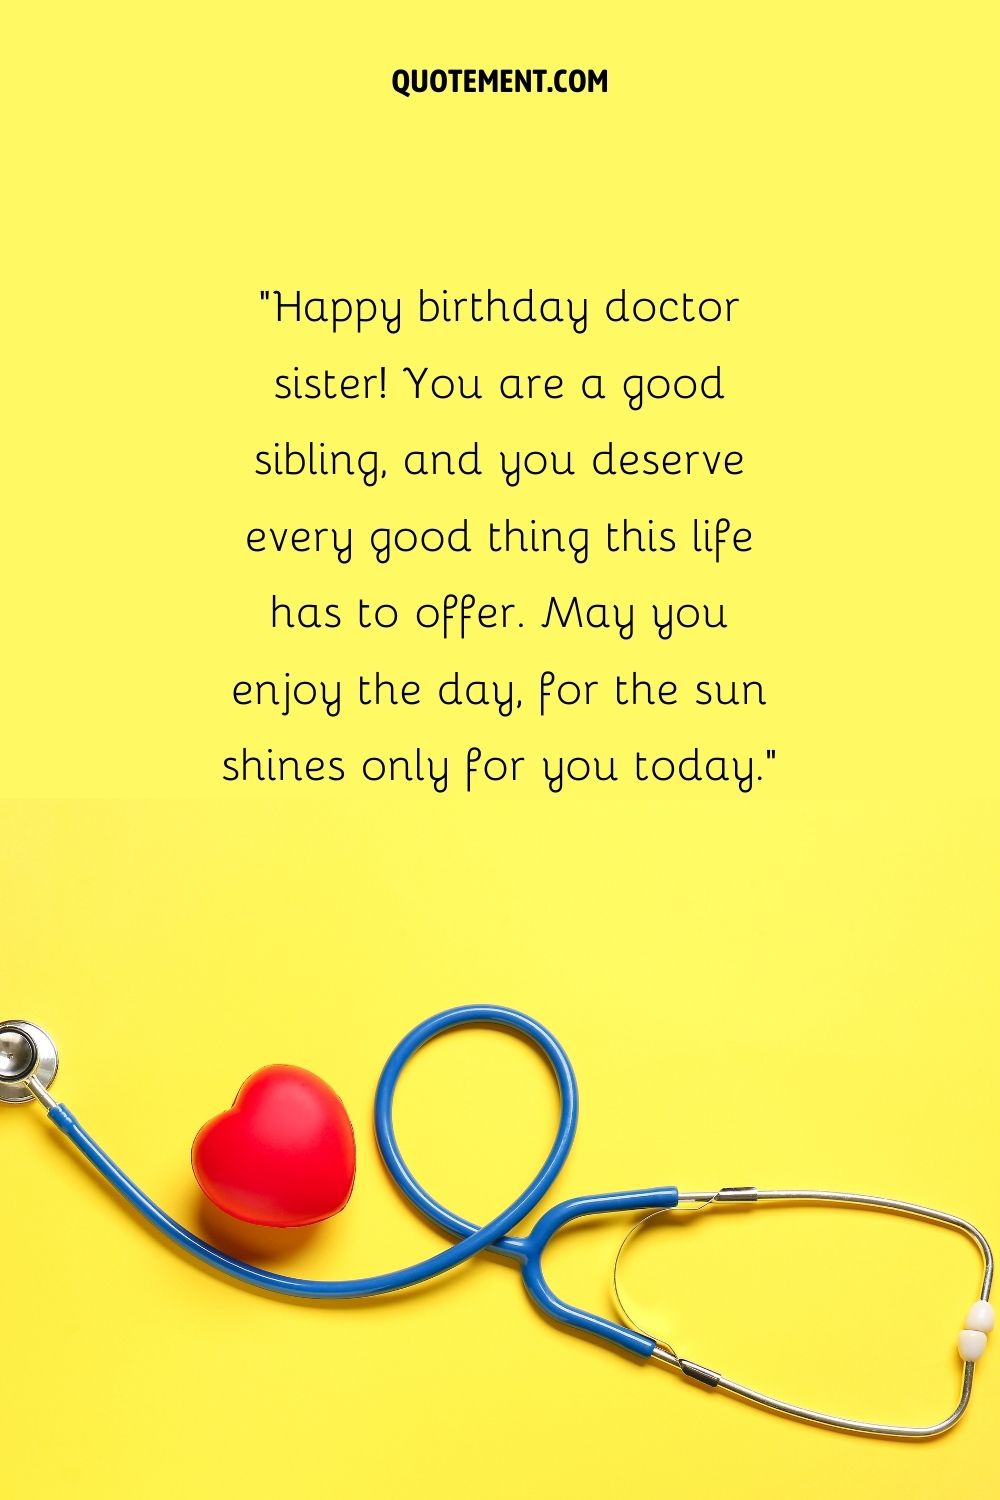 happy birthday doctor sister represented by basics of medical equipment